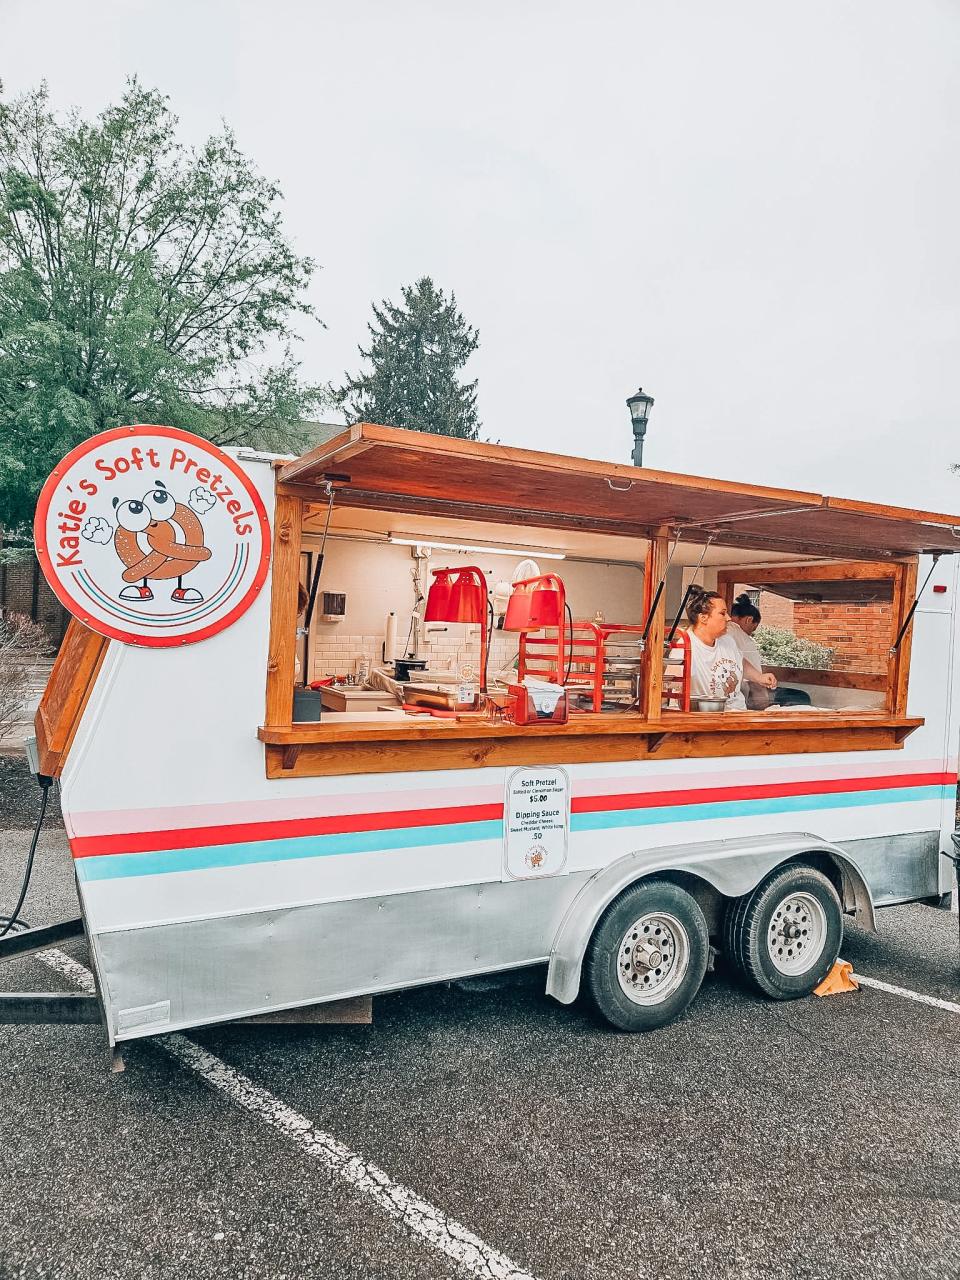 Katie Smith’s husband, Spencer, converted an empty shell of a trailer into his wife’s new Katie’s Soft Pretzels food trailer.